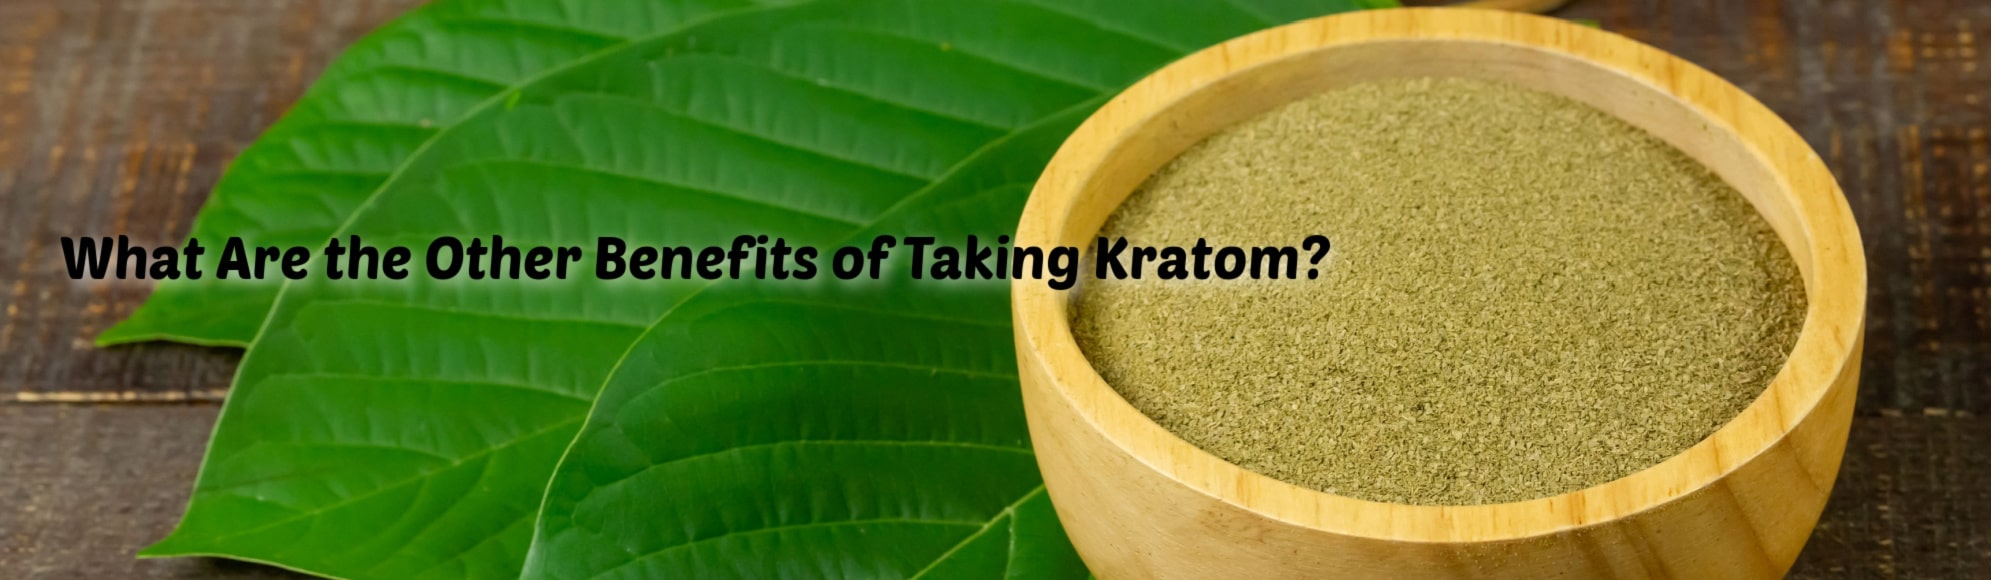 image of what are the other benefits of taking kratom